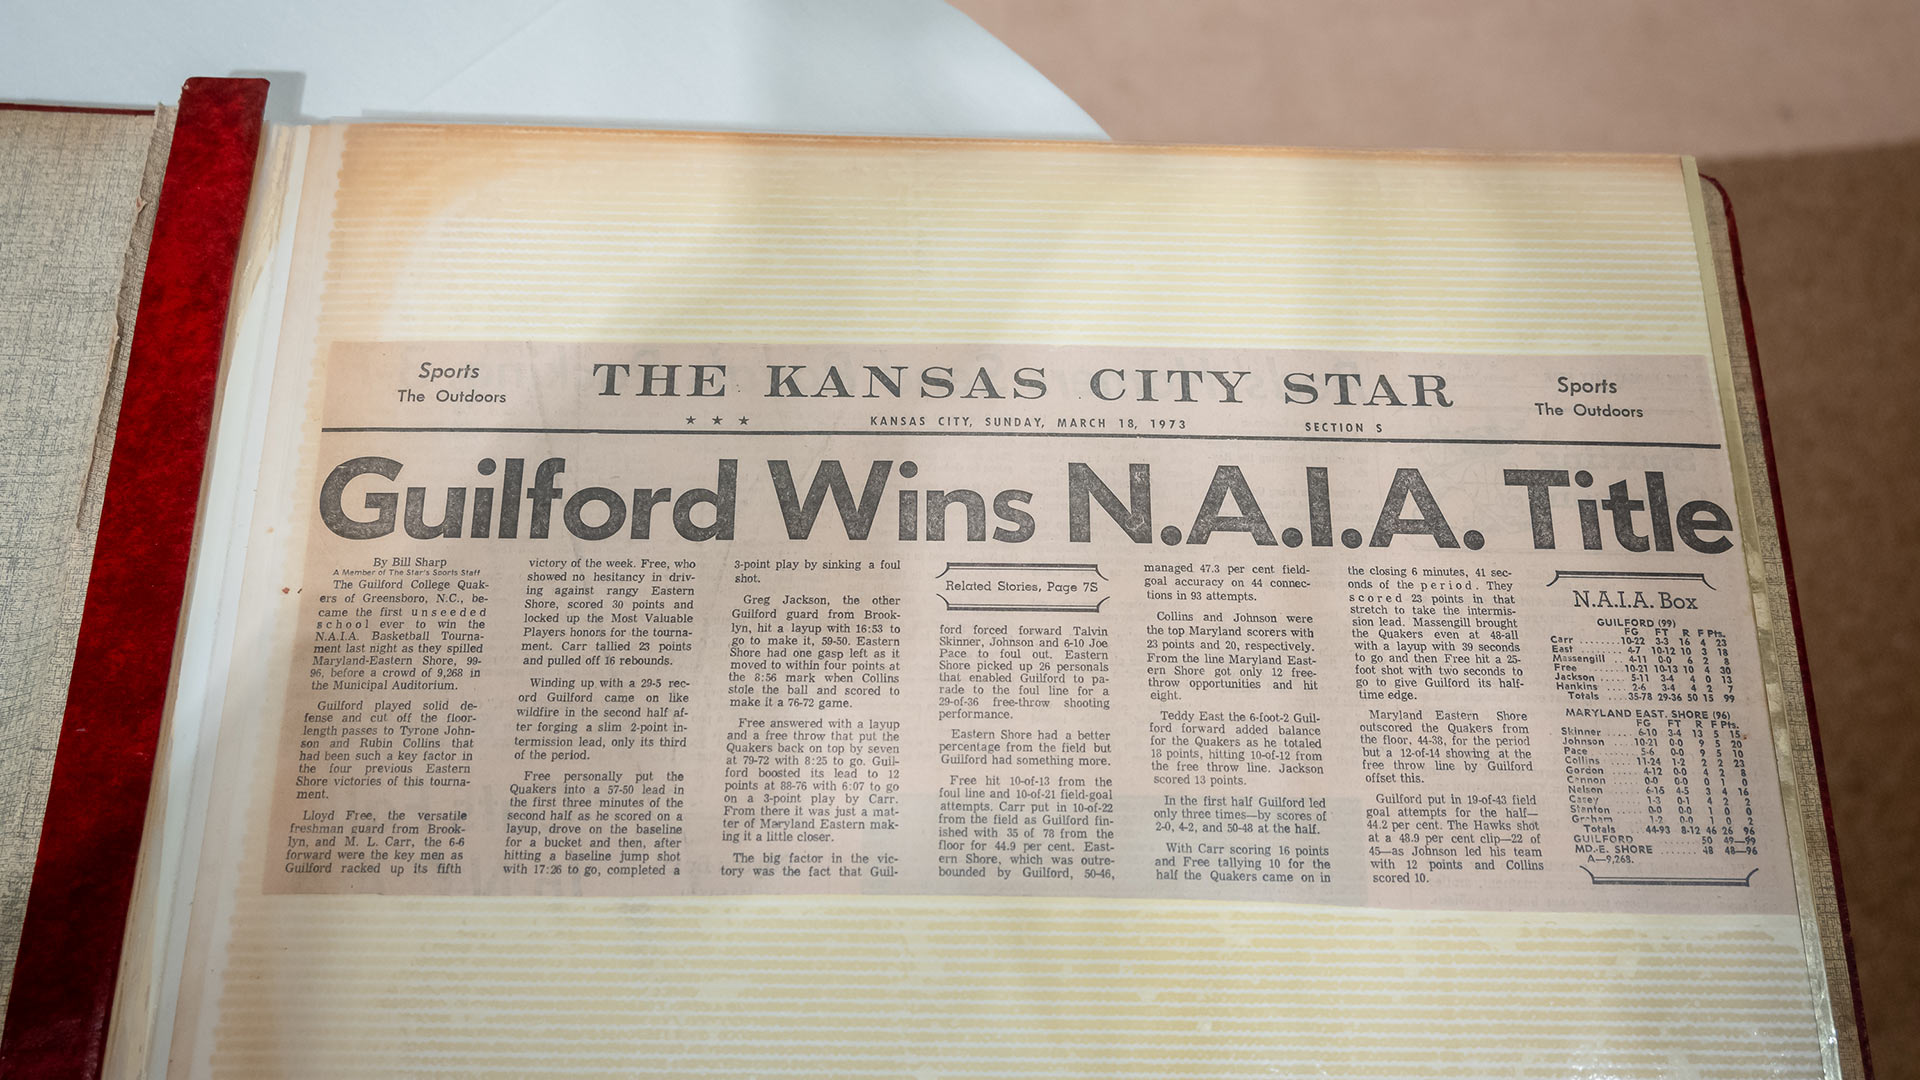 A scrapbook with the story about Guilford’s championship victory in the Kansas City Star newspaper.